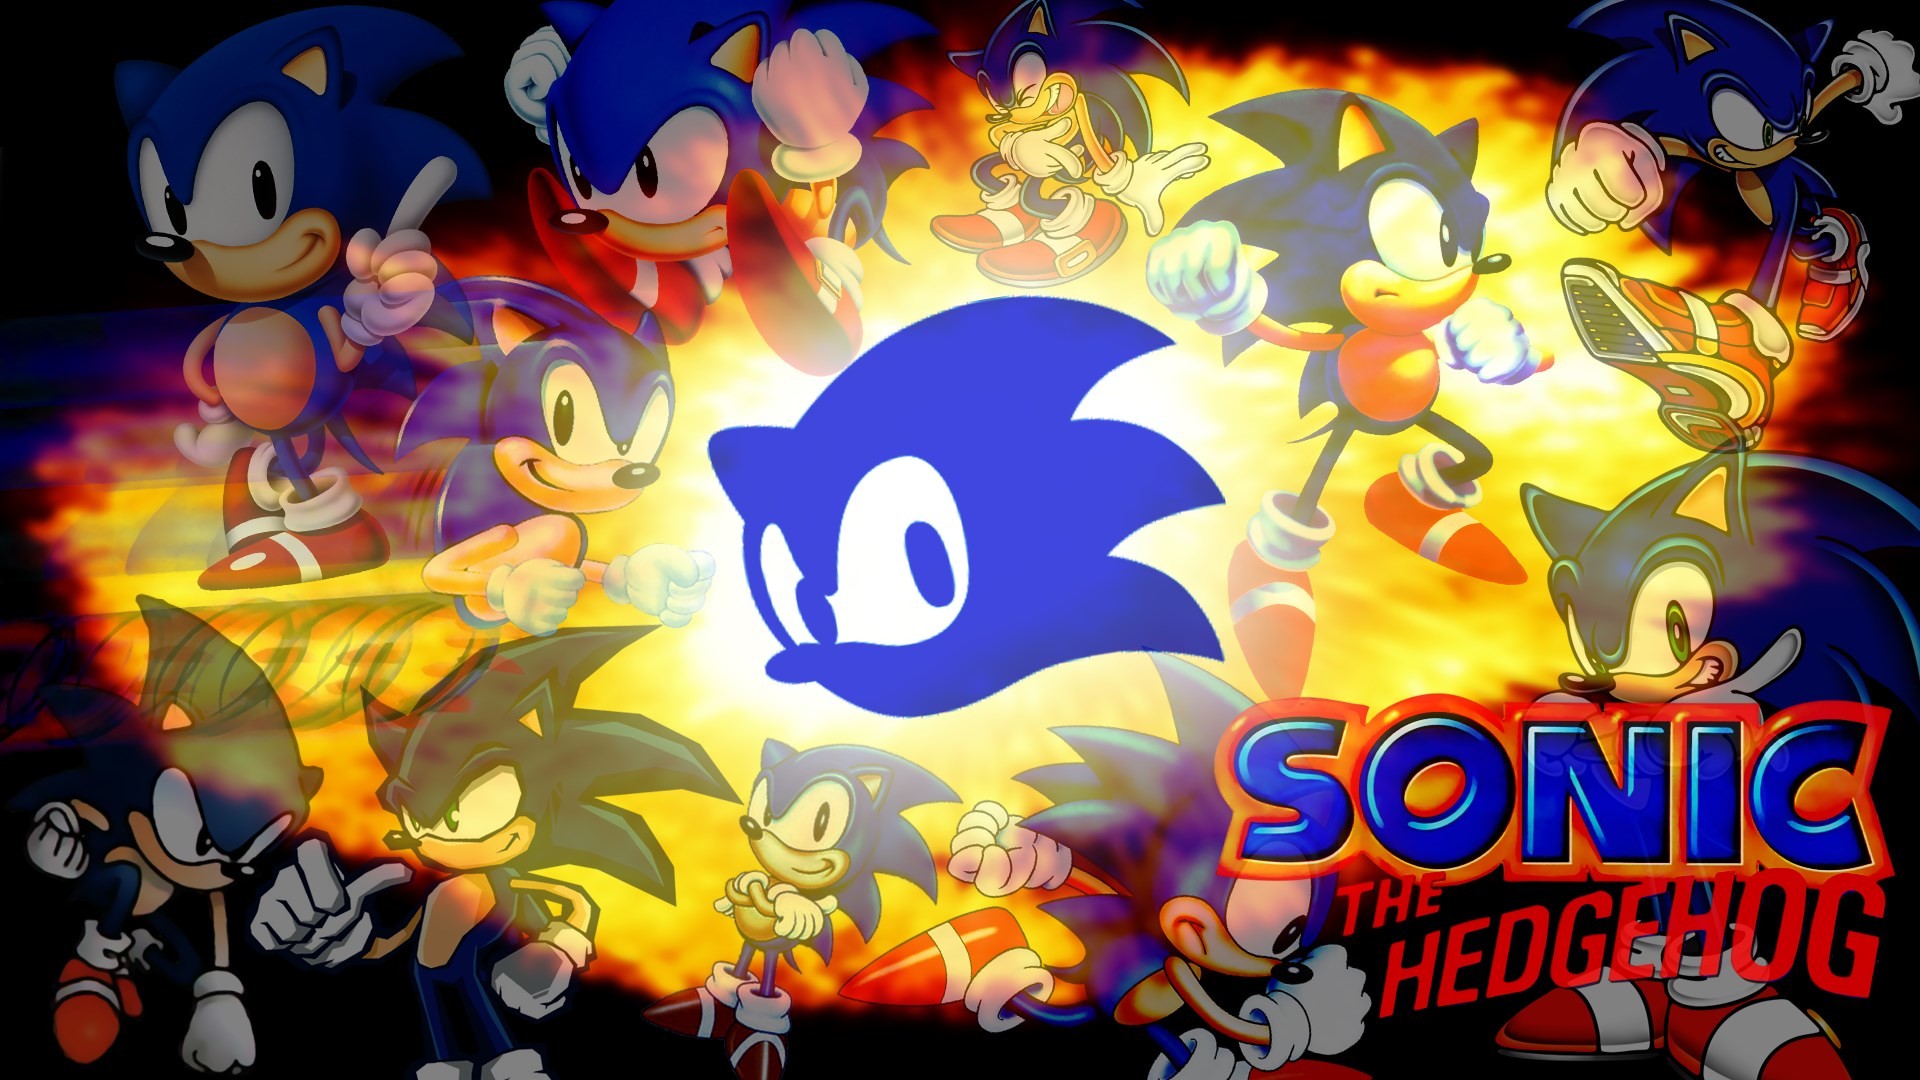 1920x1080 sonic the hedgehog wallpaper - Background hd - sonic the hedgehog category